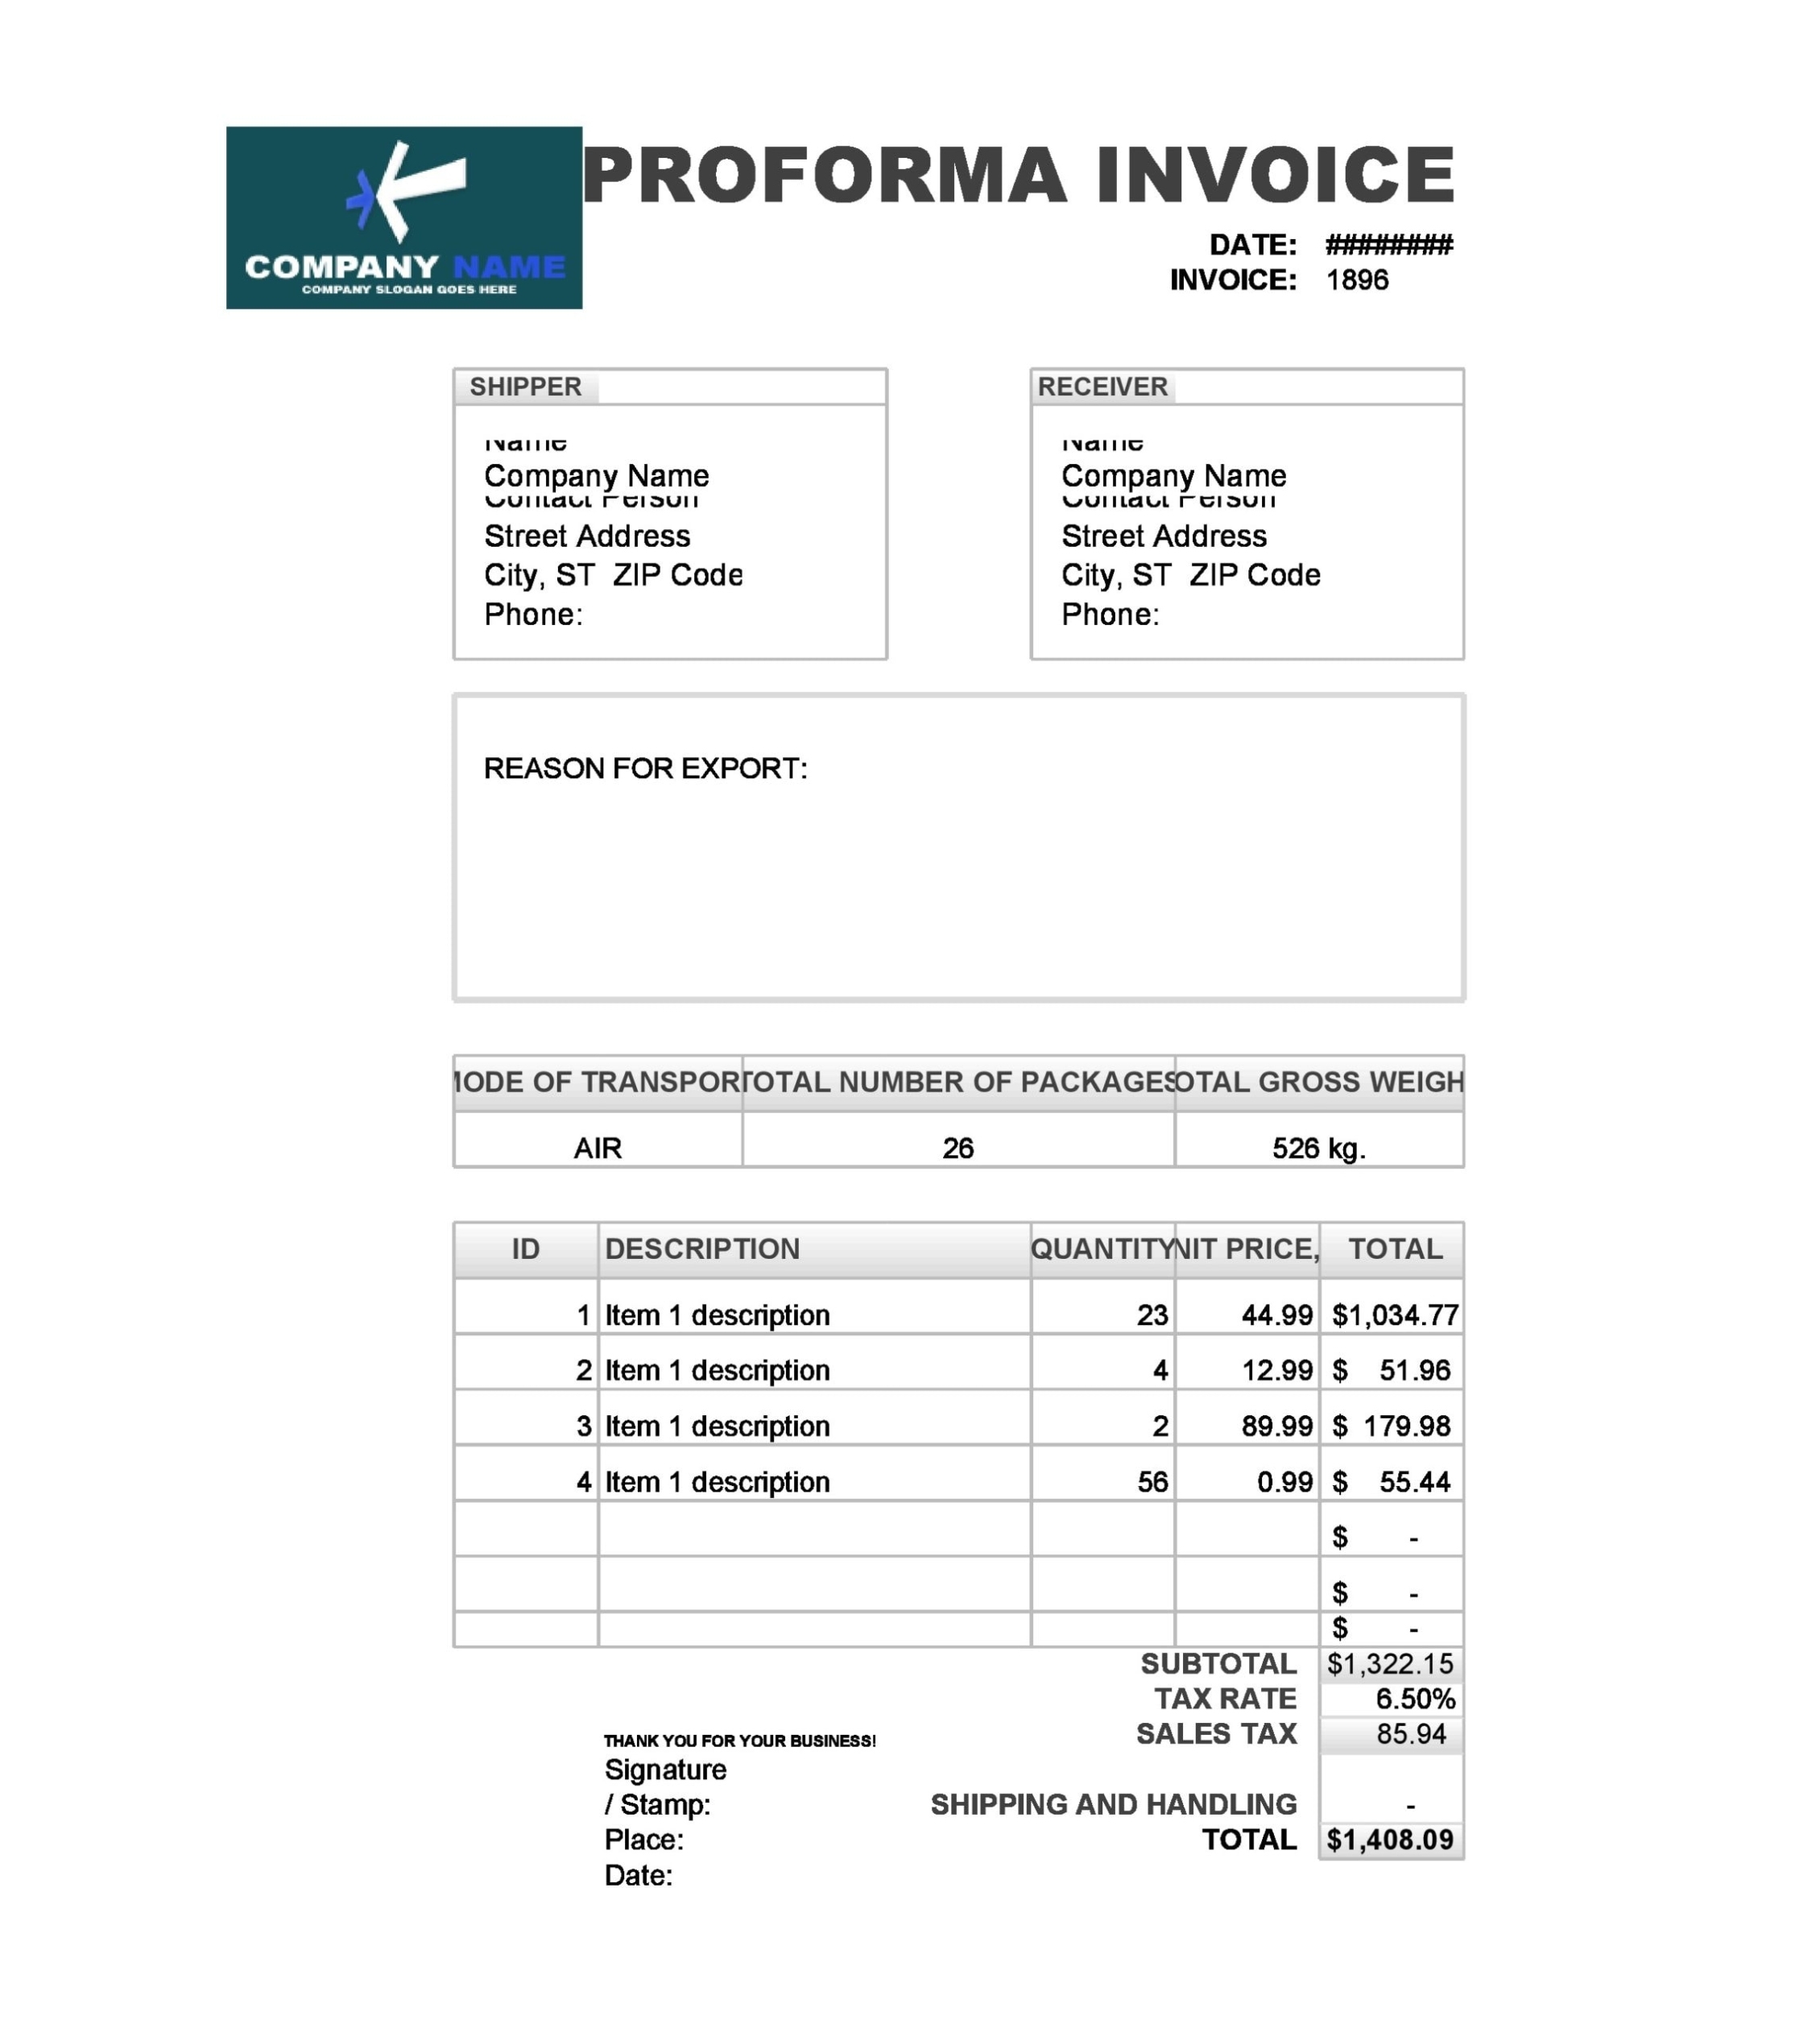 30 Free Proforma Invoice Templates [Excel, Word, Pdf] - Templatearchive intended for Free Proforma Invoice Template Word